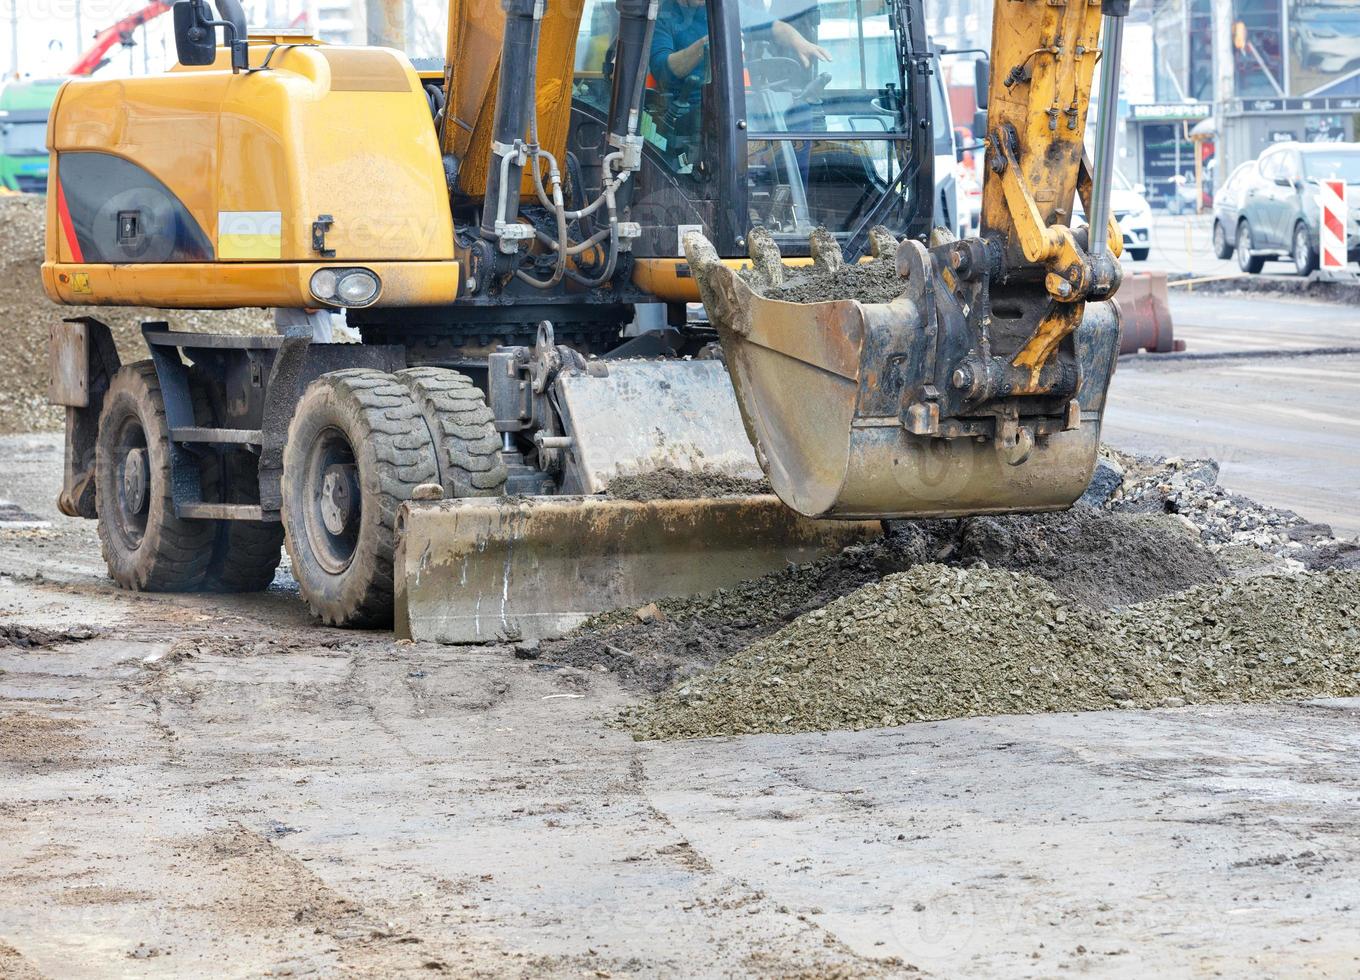 A heavy road excavator smooths a pile of rubble with a bucket at a construction site. photo